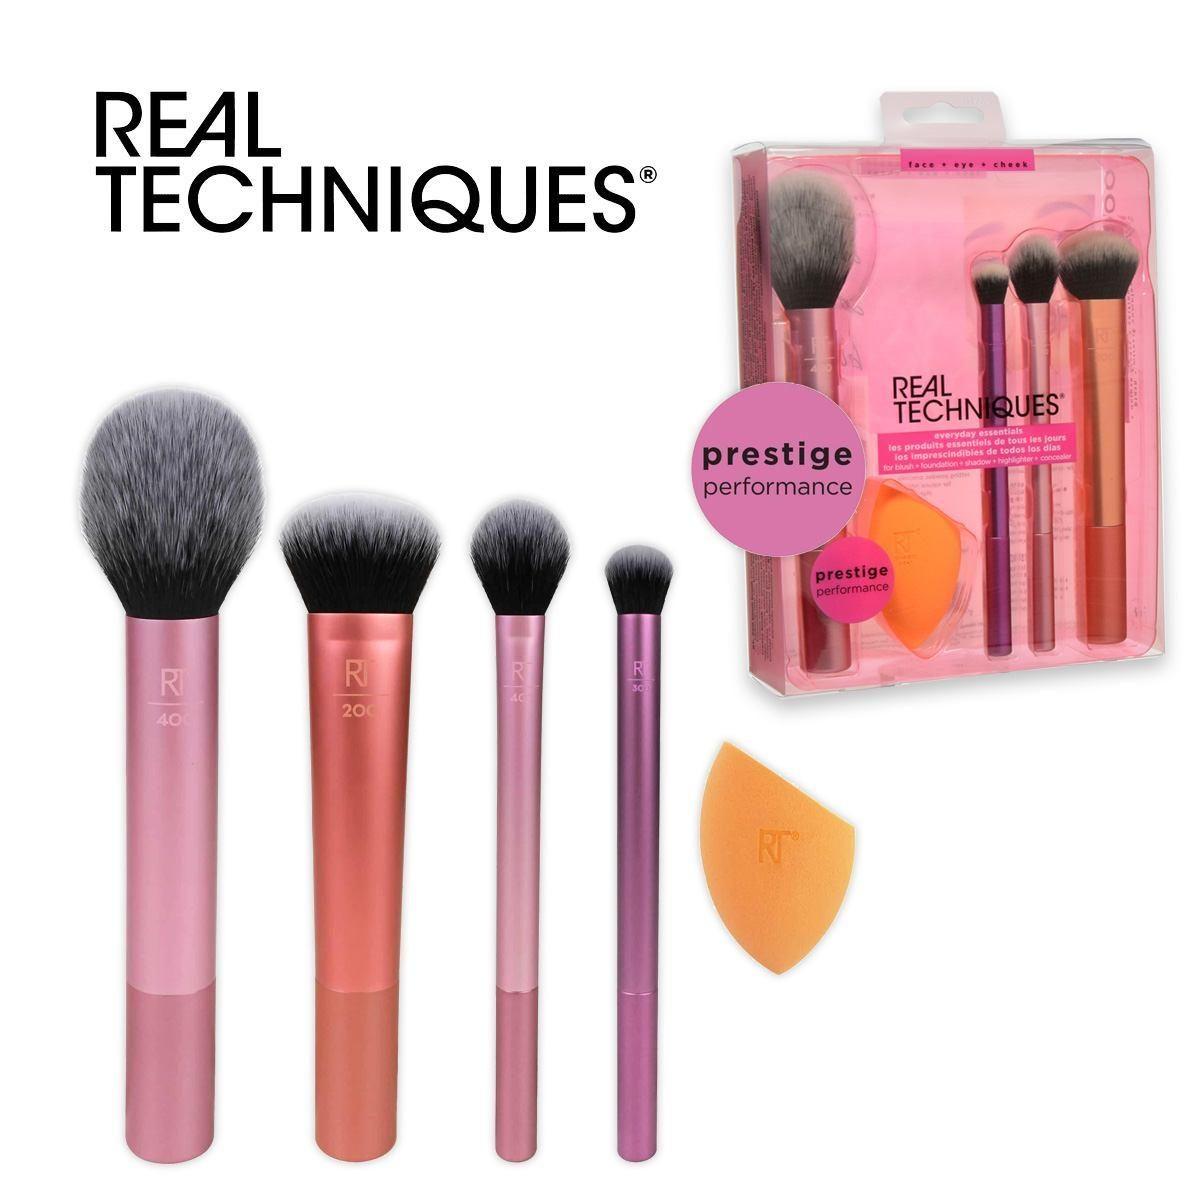 Real techniques Real techniques everiday essentials set pennelli